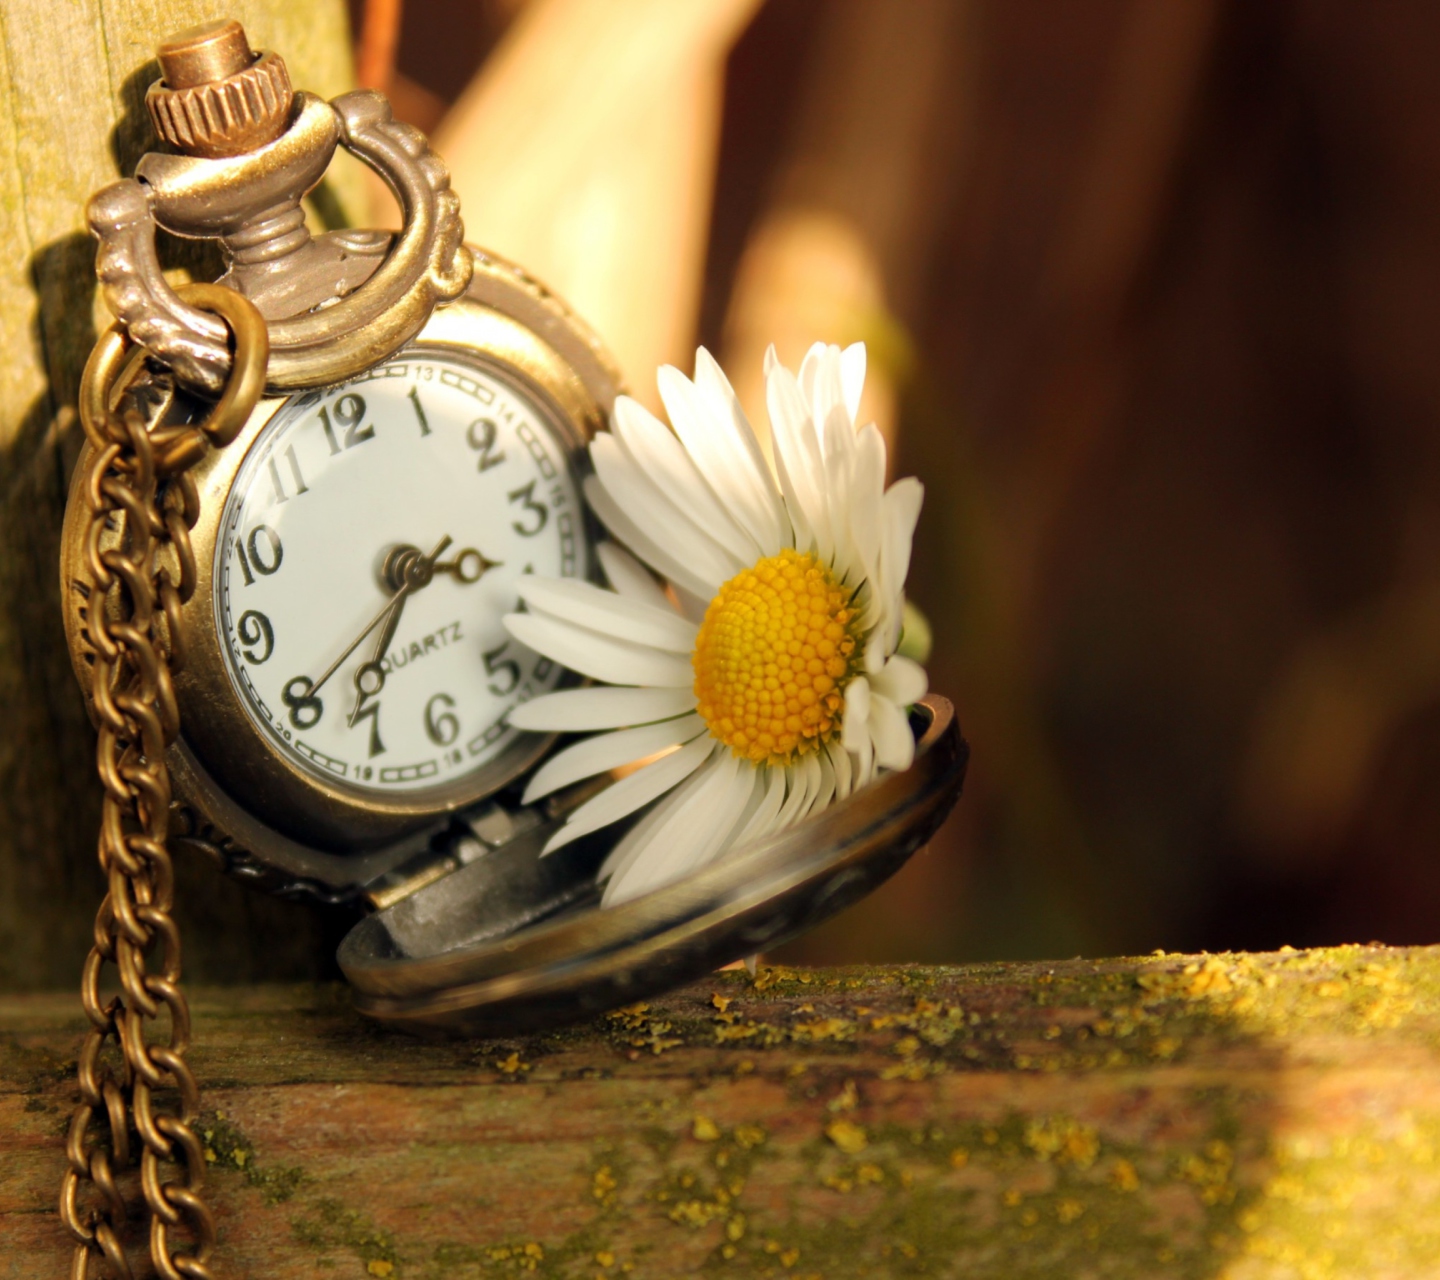 Vintage Watch And Daisy wallpaper 1440x1280